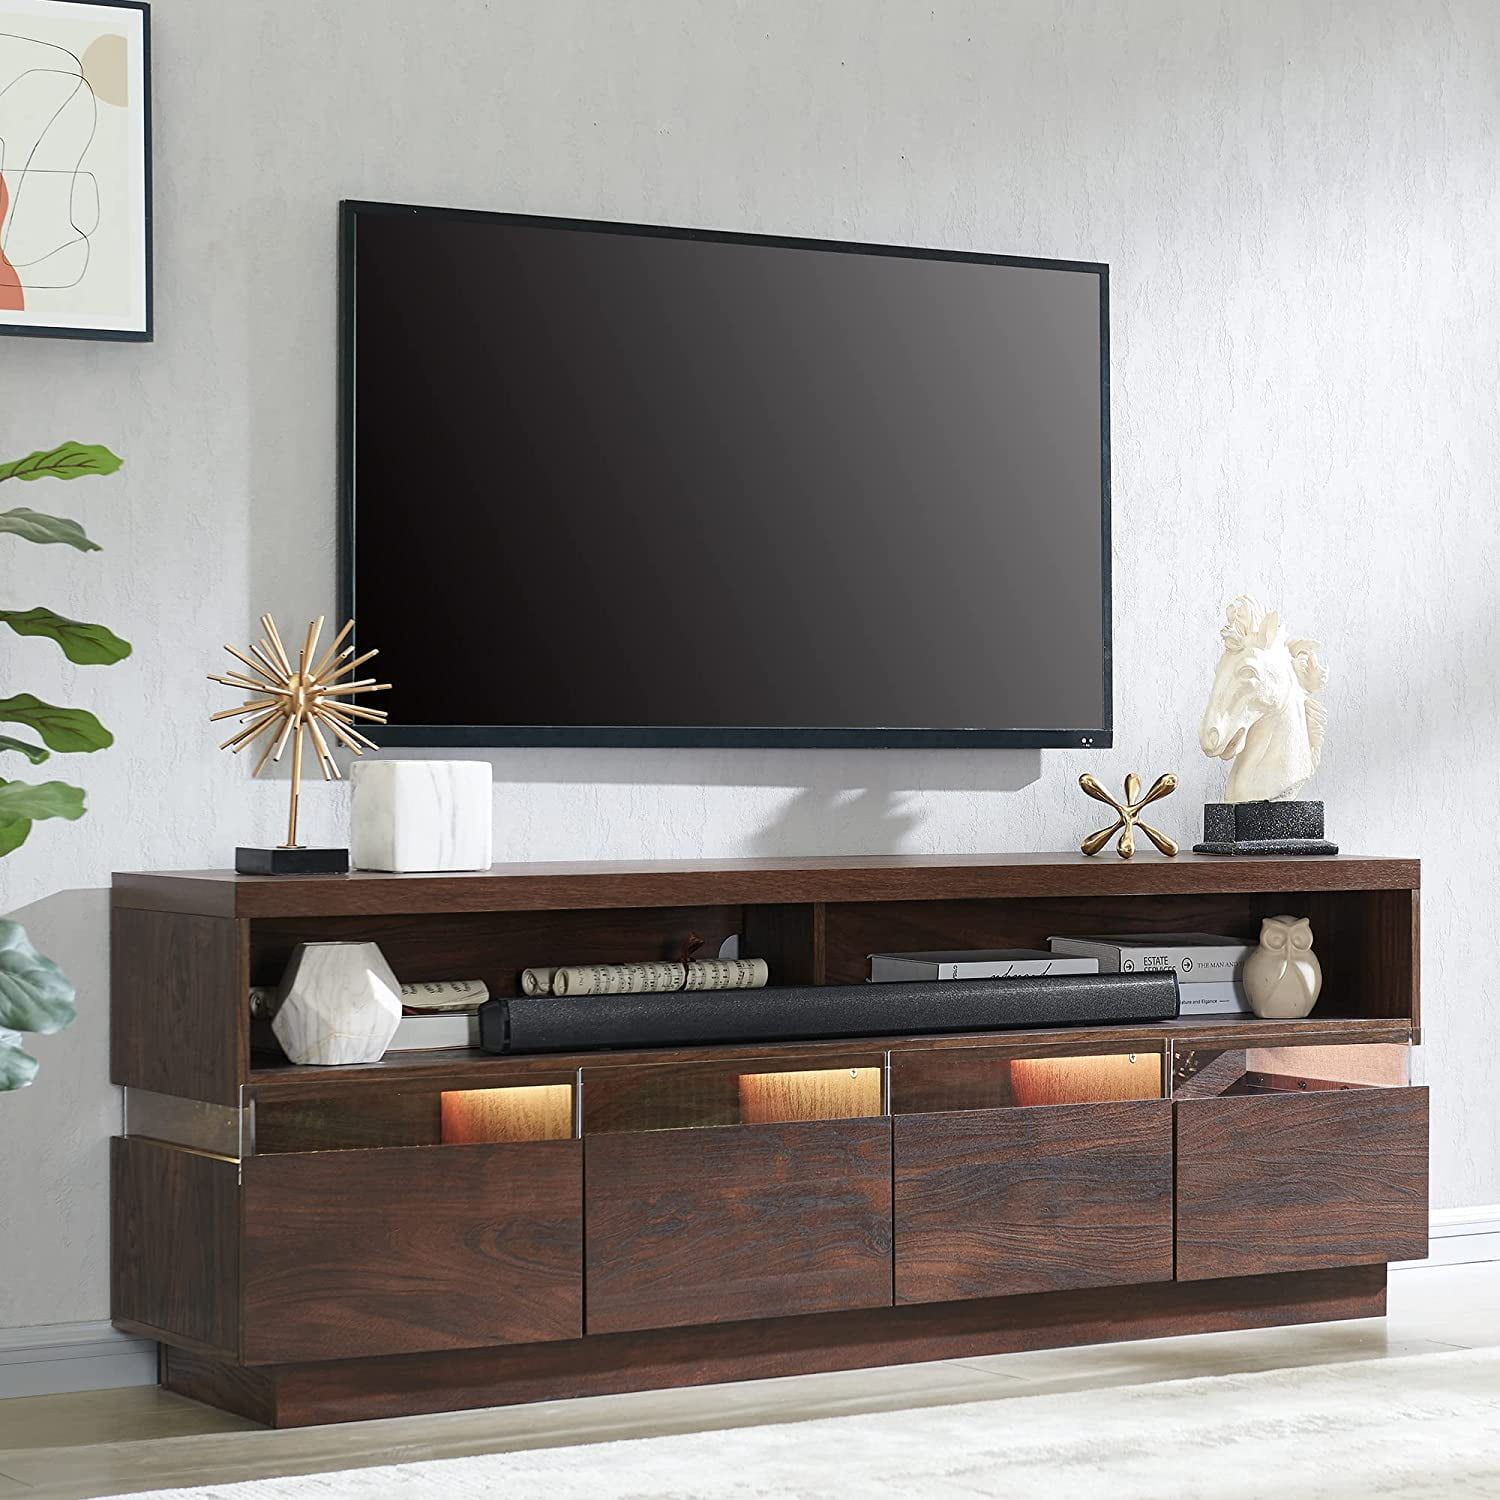 Okd Modern Wood Tv Stand For Tvs Up To 75" For Living Room With Led Lights Entertainment  Center,walnut – Walmart Inside Walnut Entertainment Centers (Photo 9 of 15)